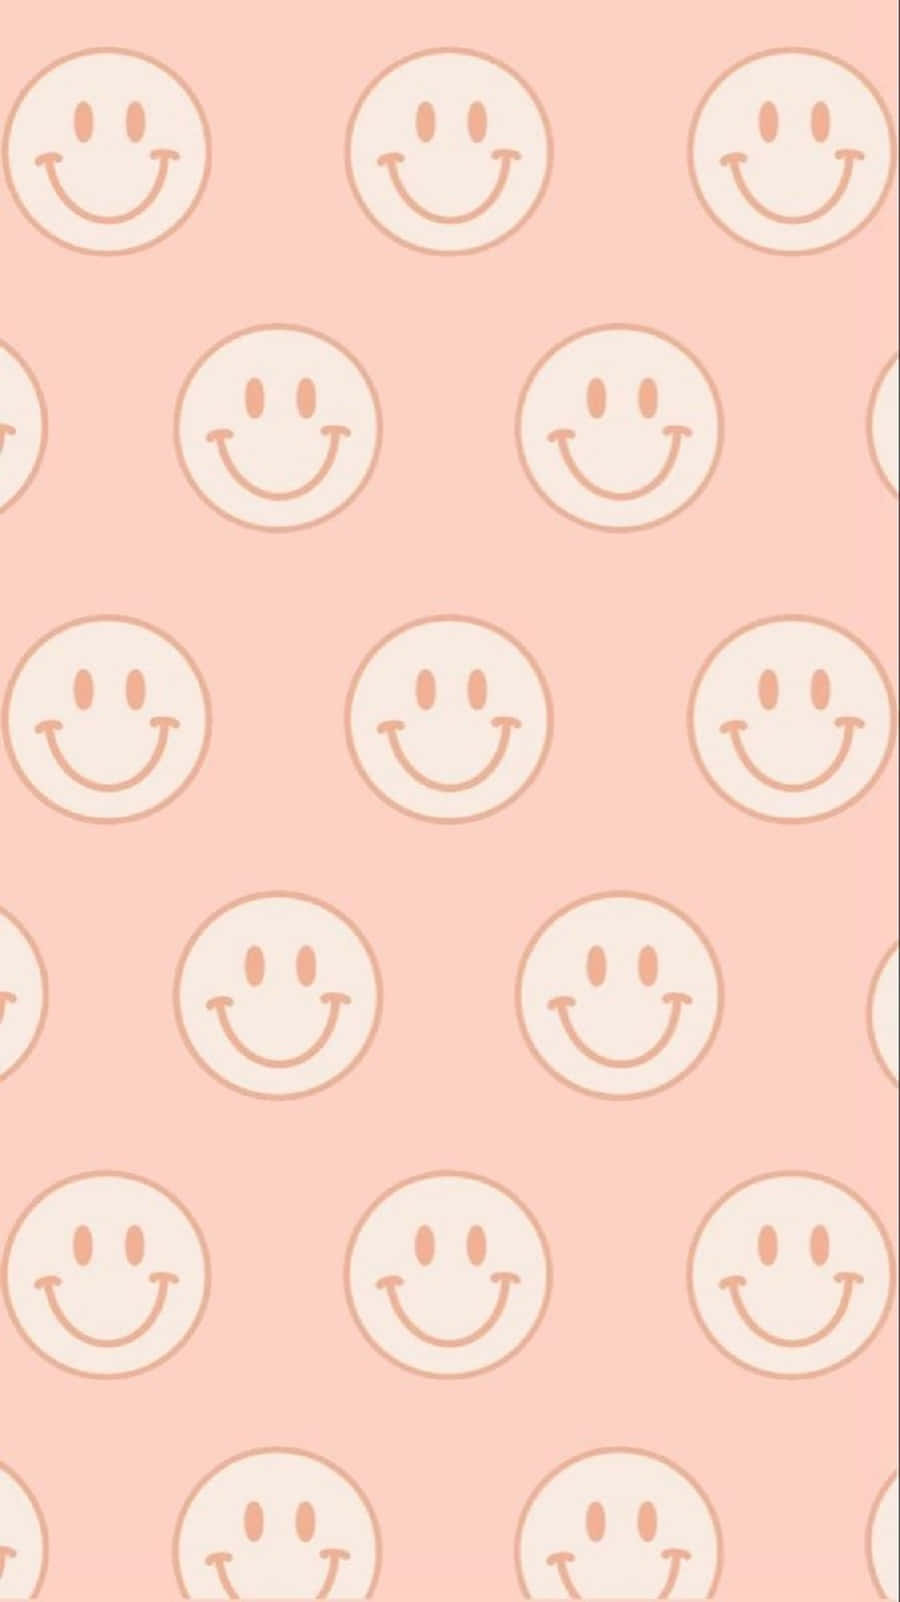 [100+] Preppy Smiley Face Backgrounds | Wallpapers.com